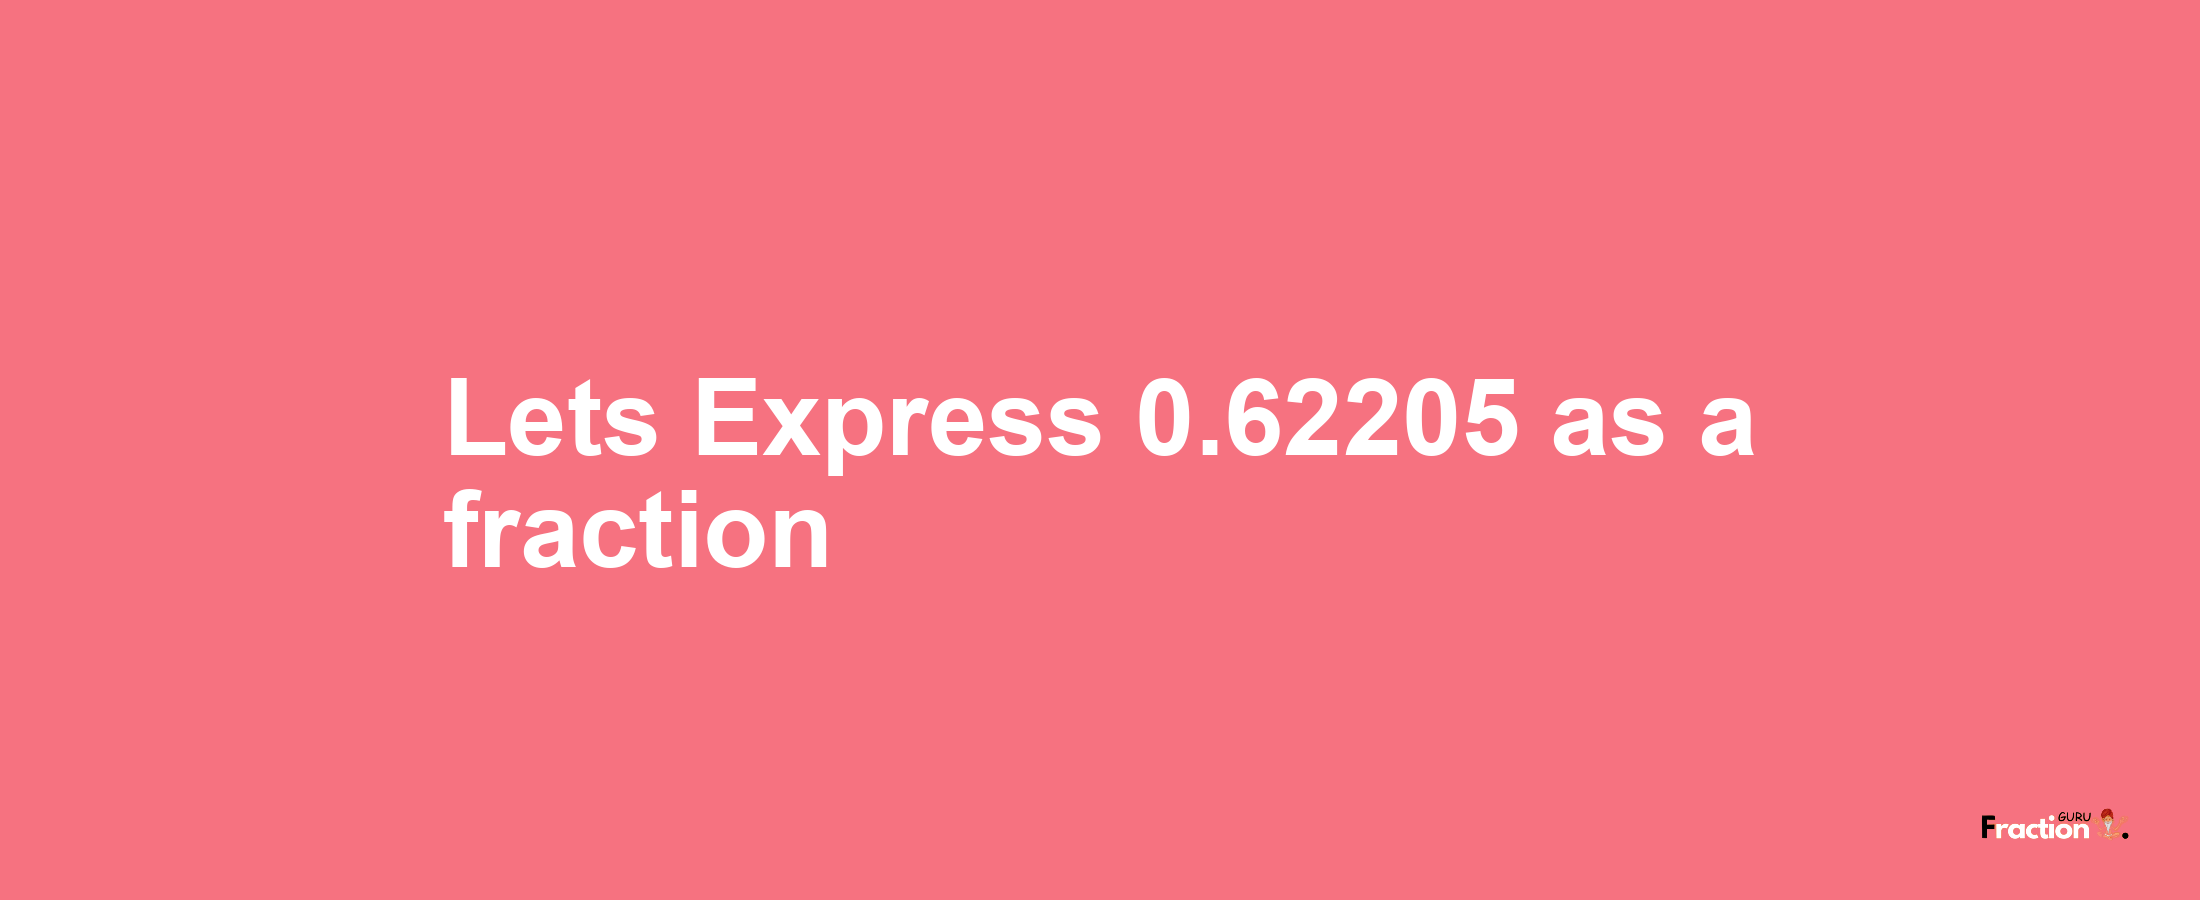 Lets Express 0.62205 as afraction